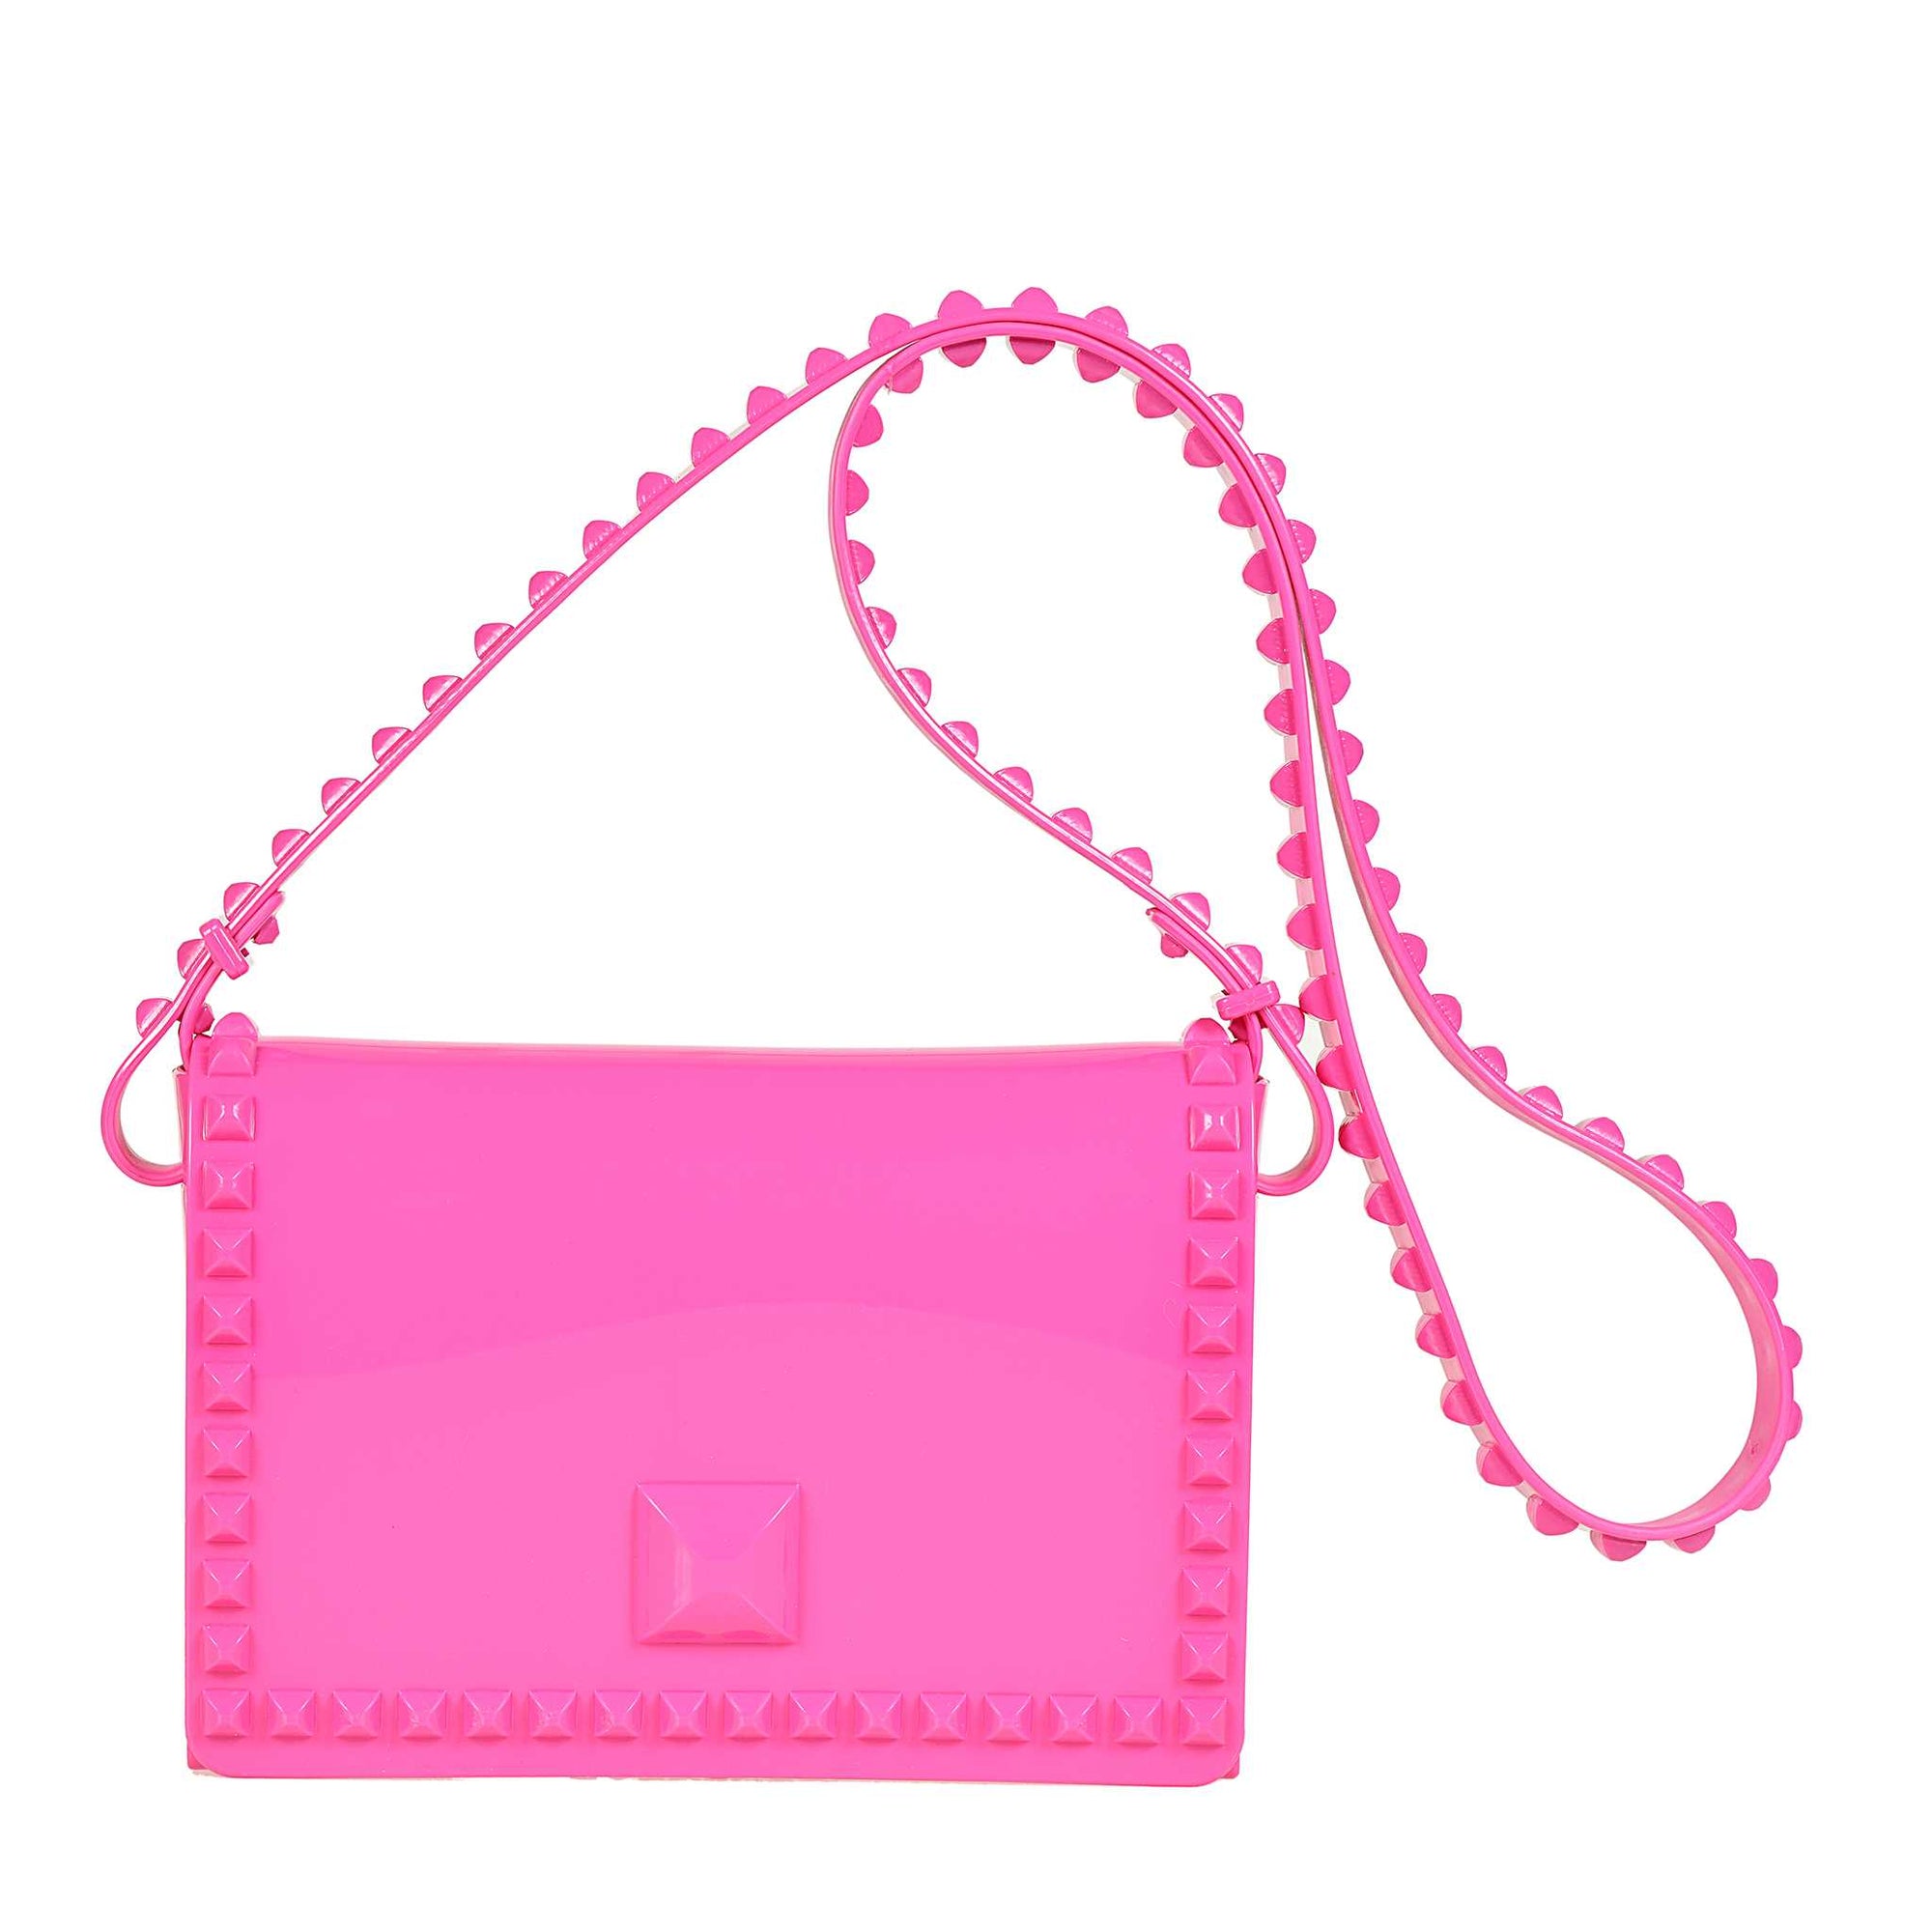 Made in Italy studded purse in color fuchsia